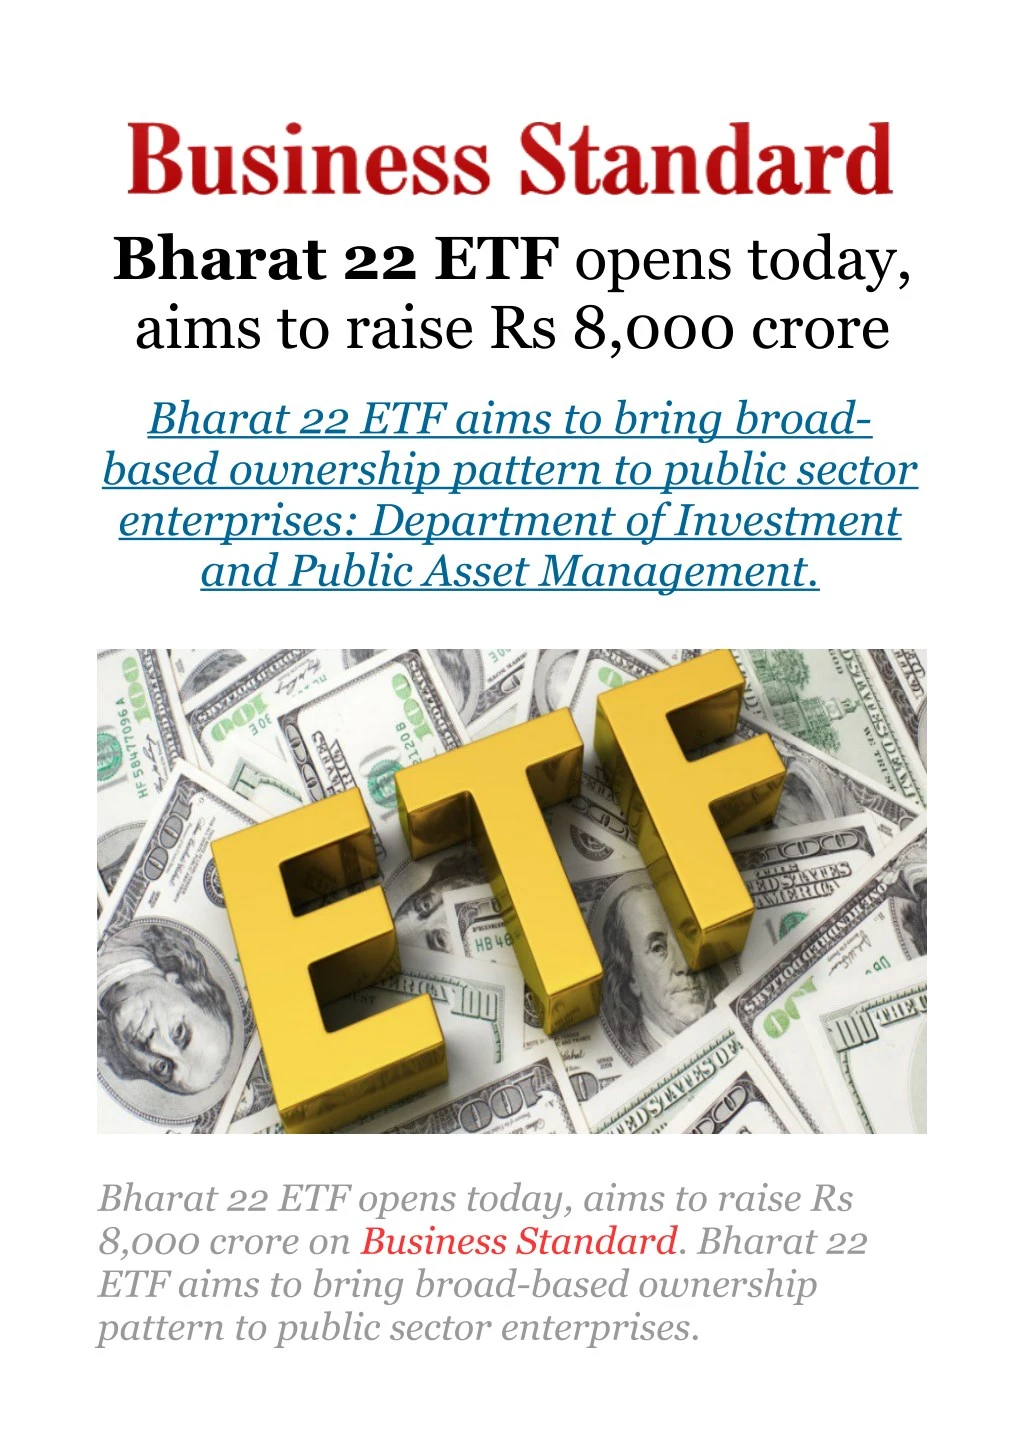 bharat 22 etf opens today aims to raise